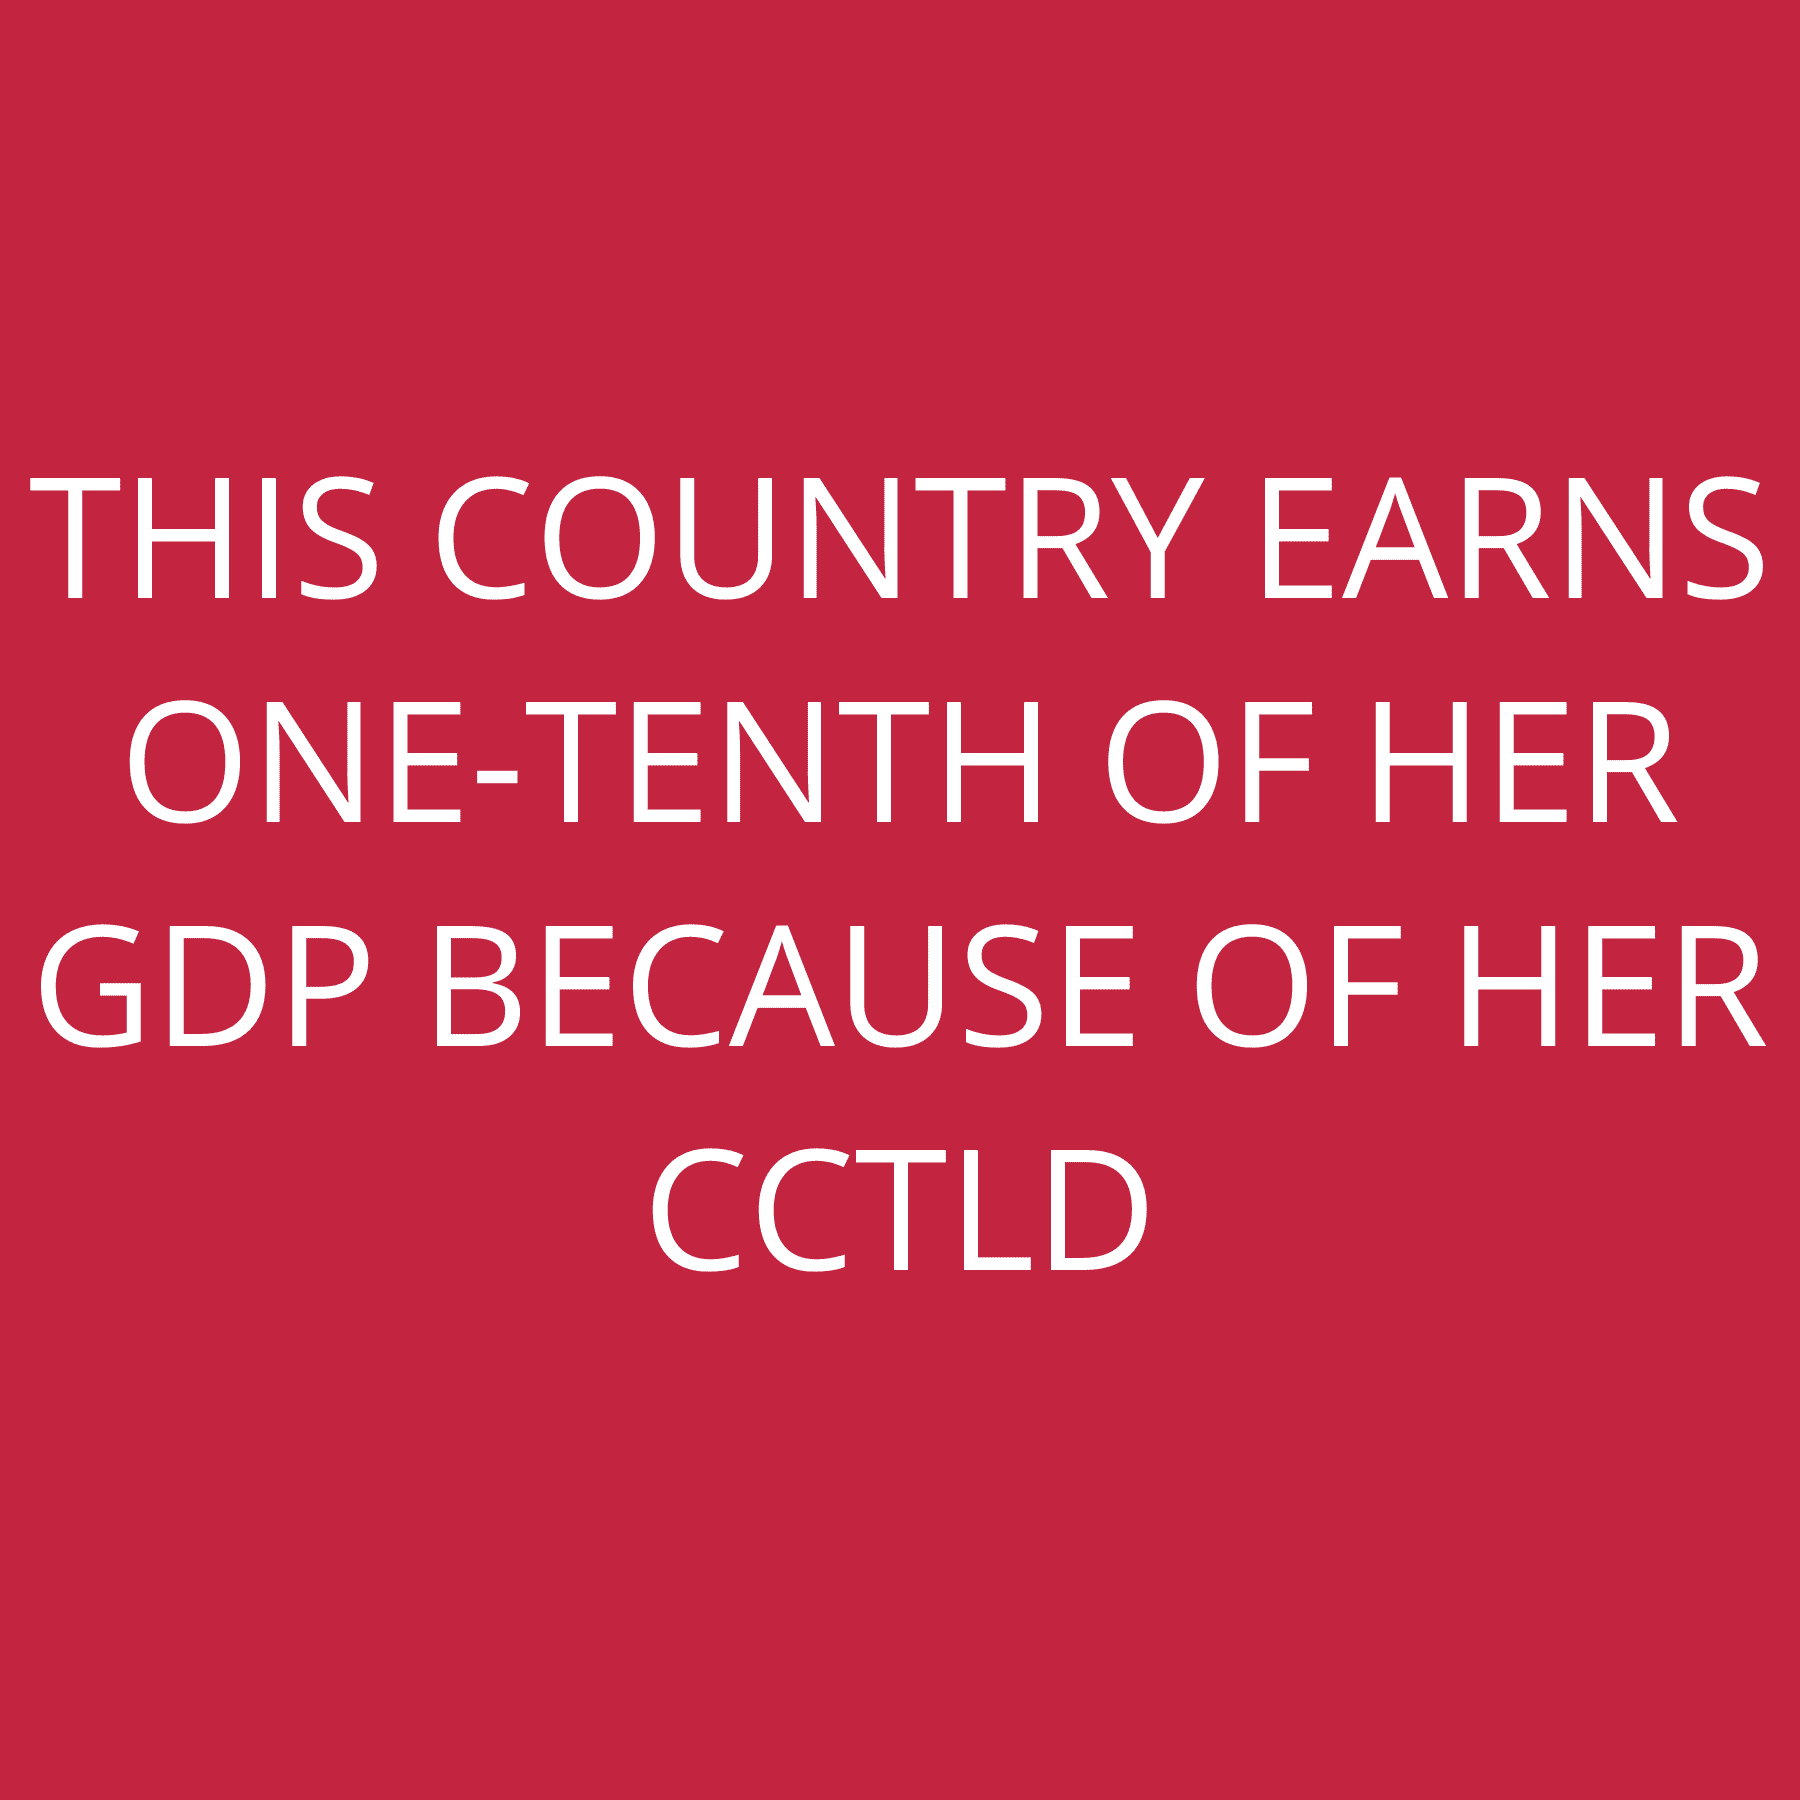 This country earns One-tenth of her GDP because of her ccTLD